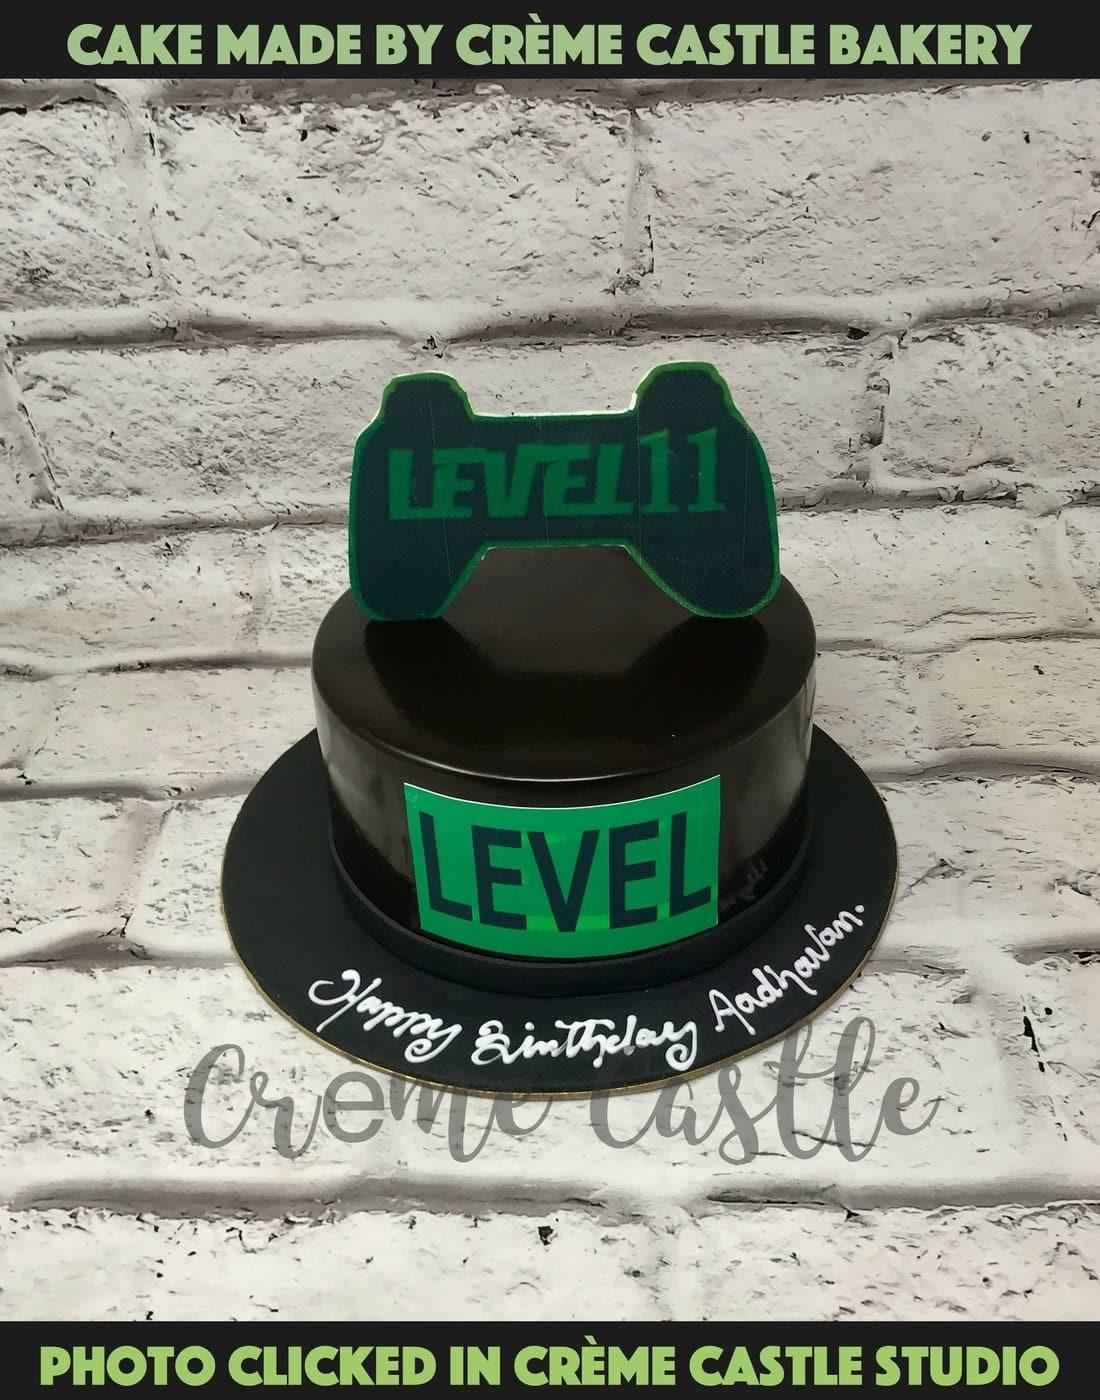 Gaming Theme Cake by Creme Castle